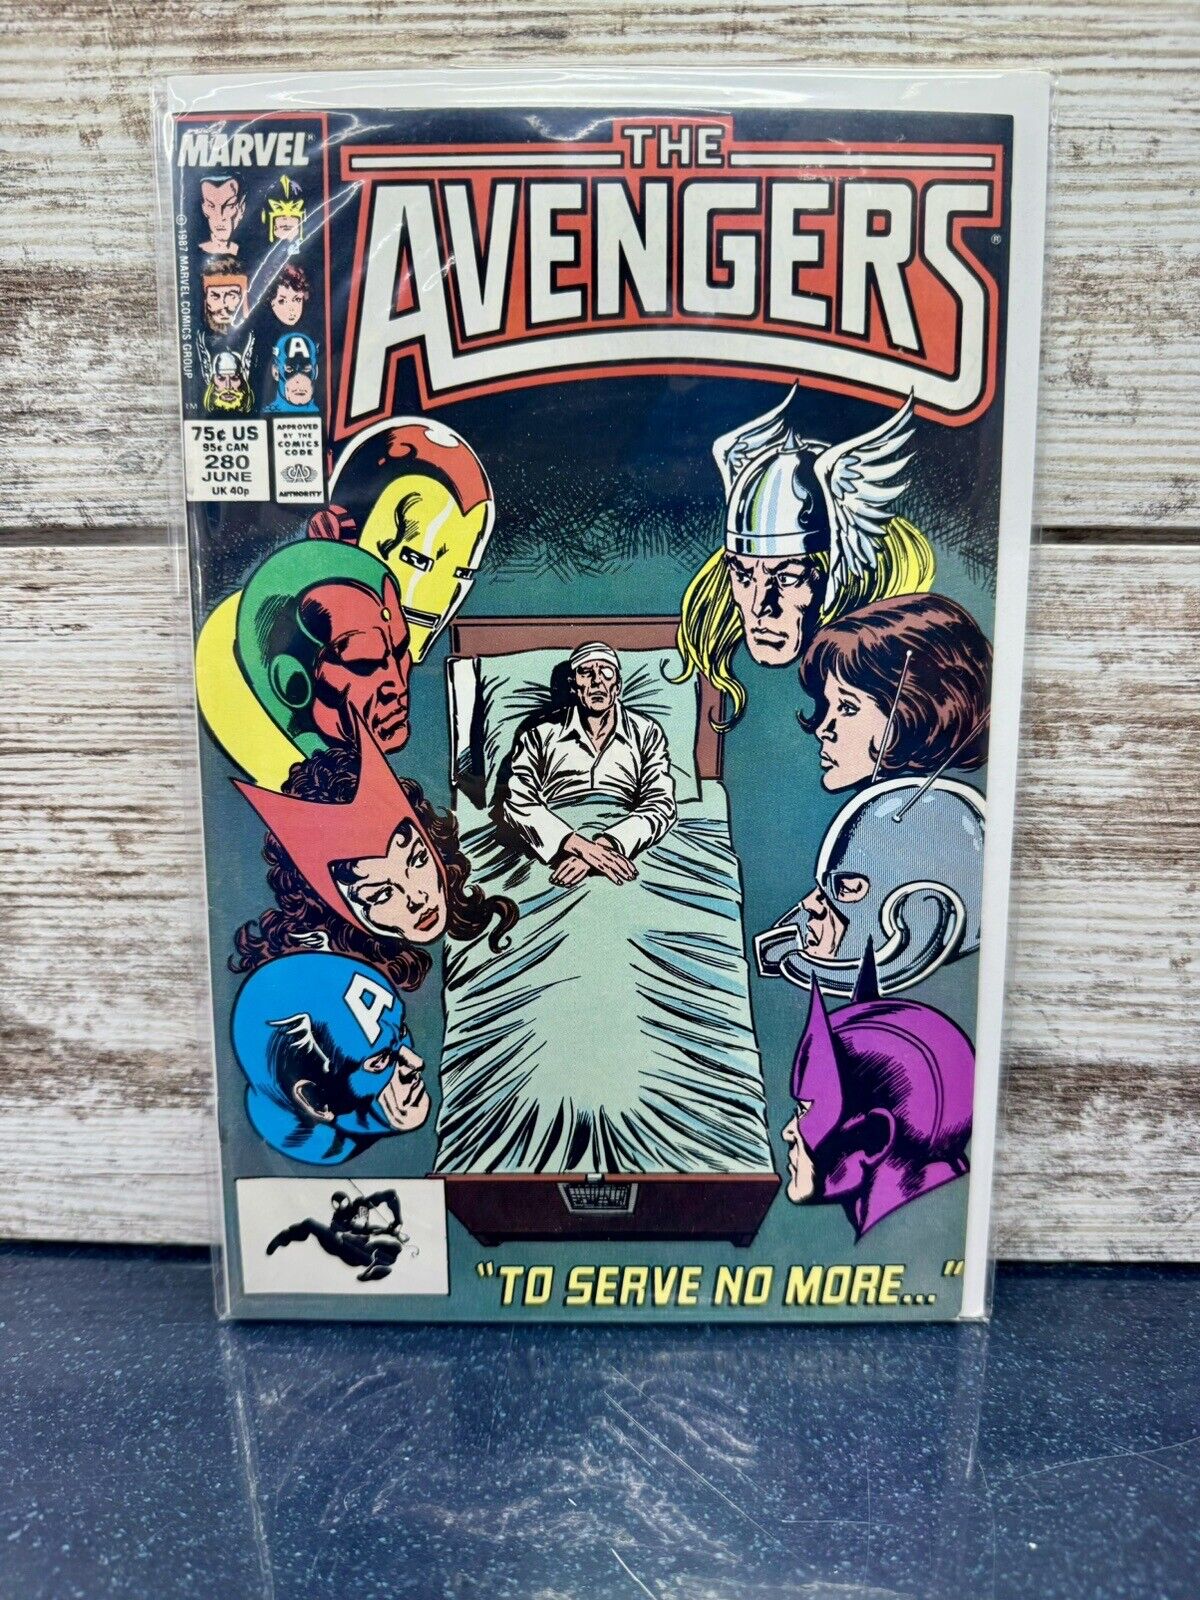 THE AVENGERS #280 JUNE 1987 MARVEL COMICS, Awesome Condition, 75 Cent, Copper